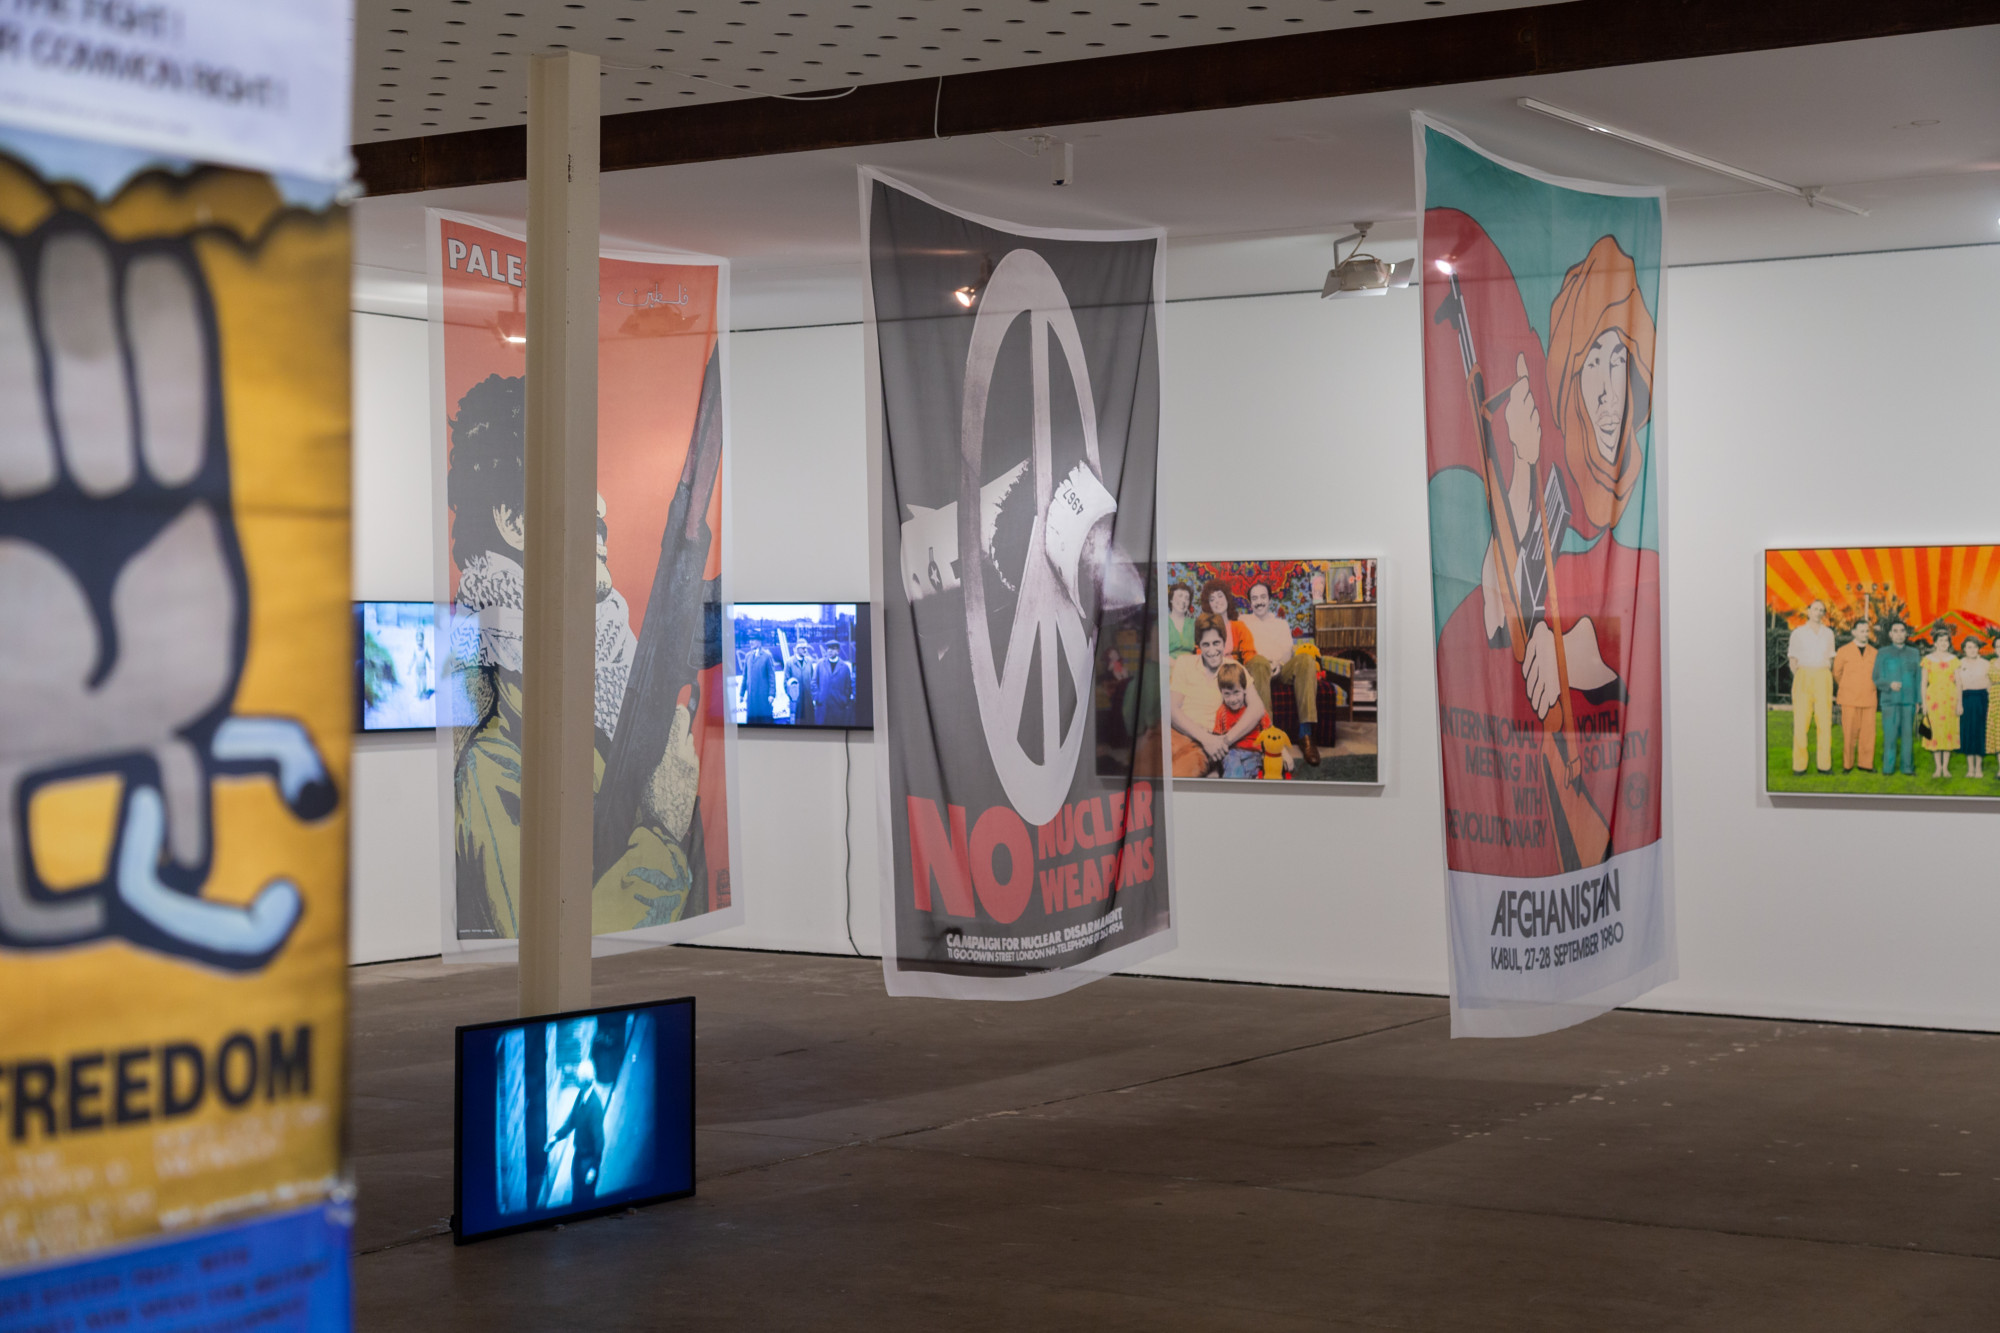 Installation view of Ruth Maddison: It was the best of times, it was the worst of times, 2021, Centre for Contemporary Photography. Photo: J Forsyth.